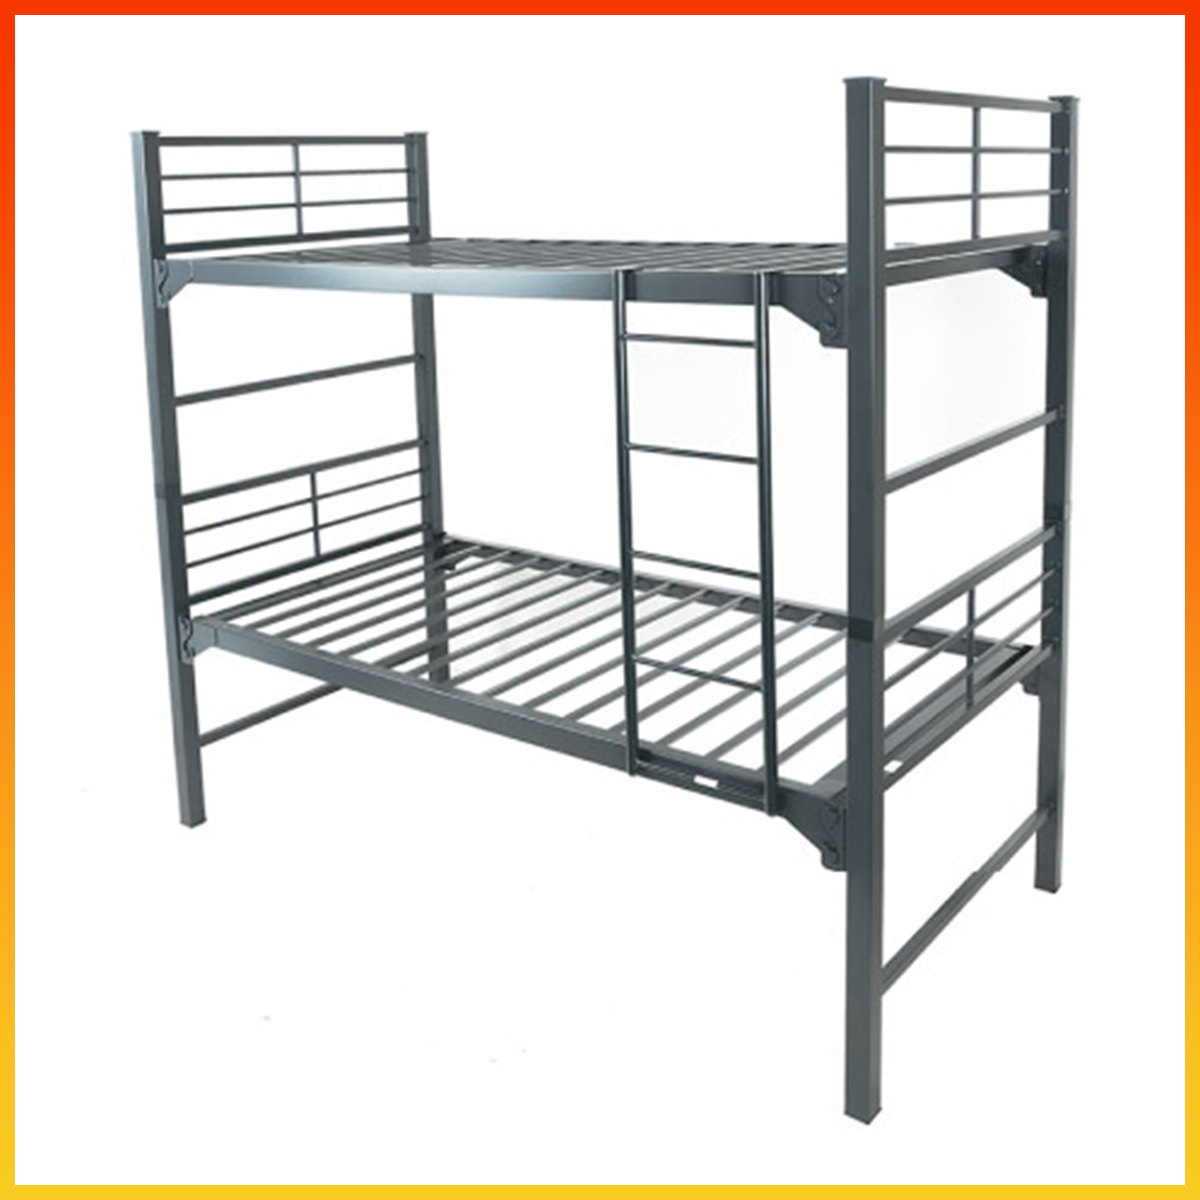 Heavy Duty Bunk Beds Visualhunt, Heavy Duty Bunk Bed Frame